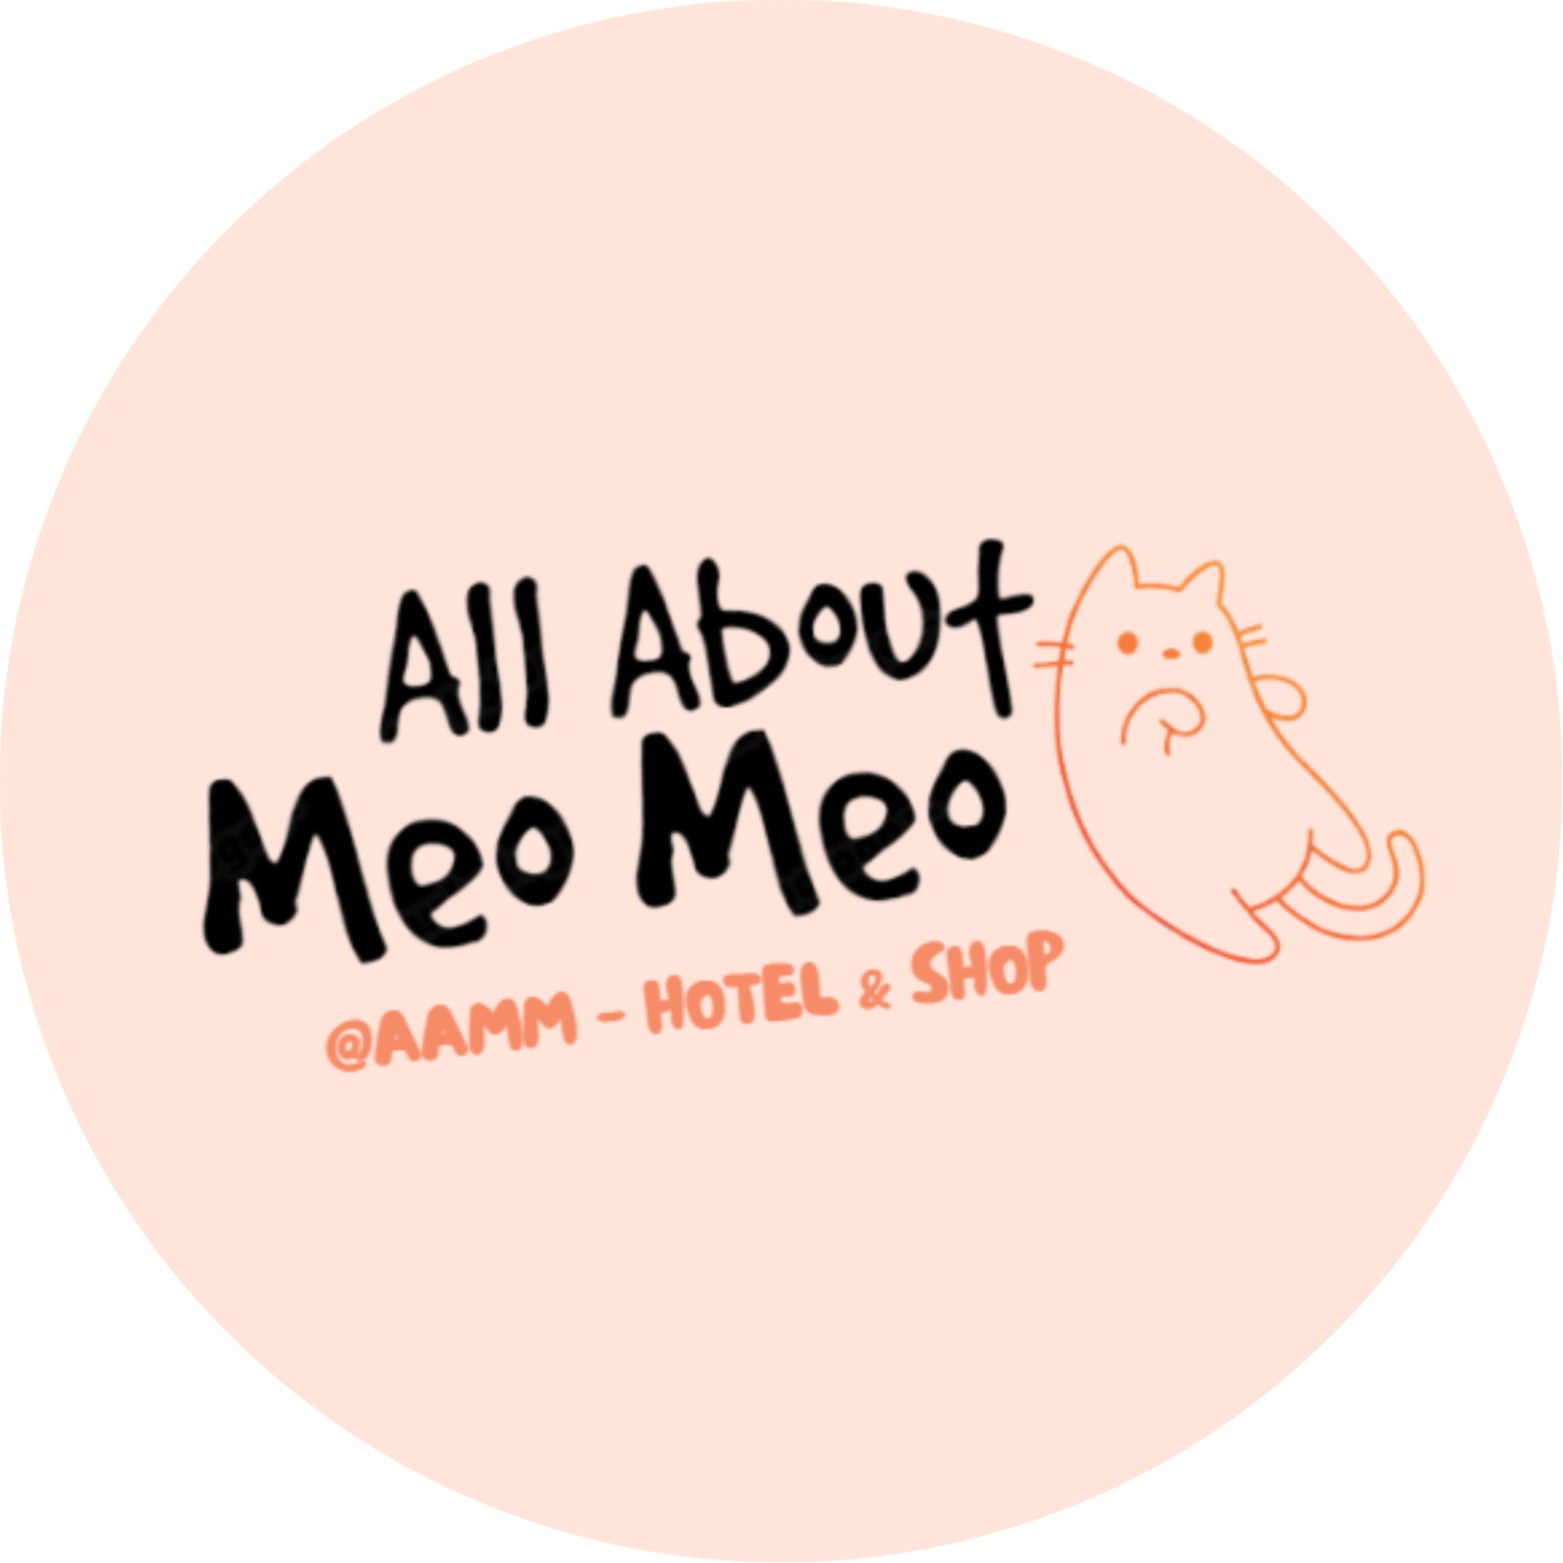 All About Meo Meo